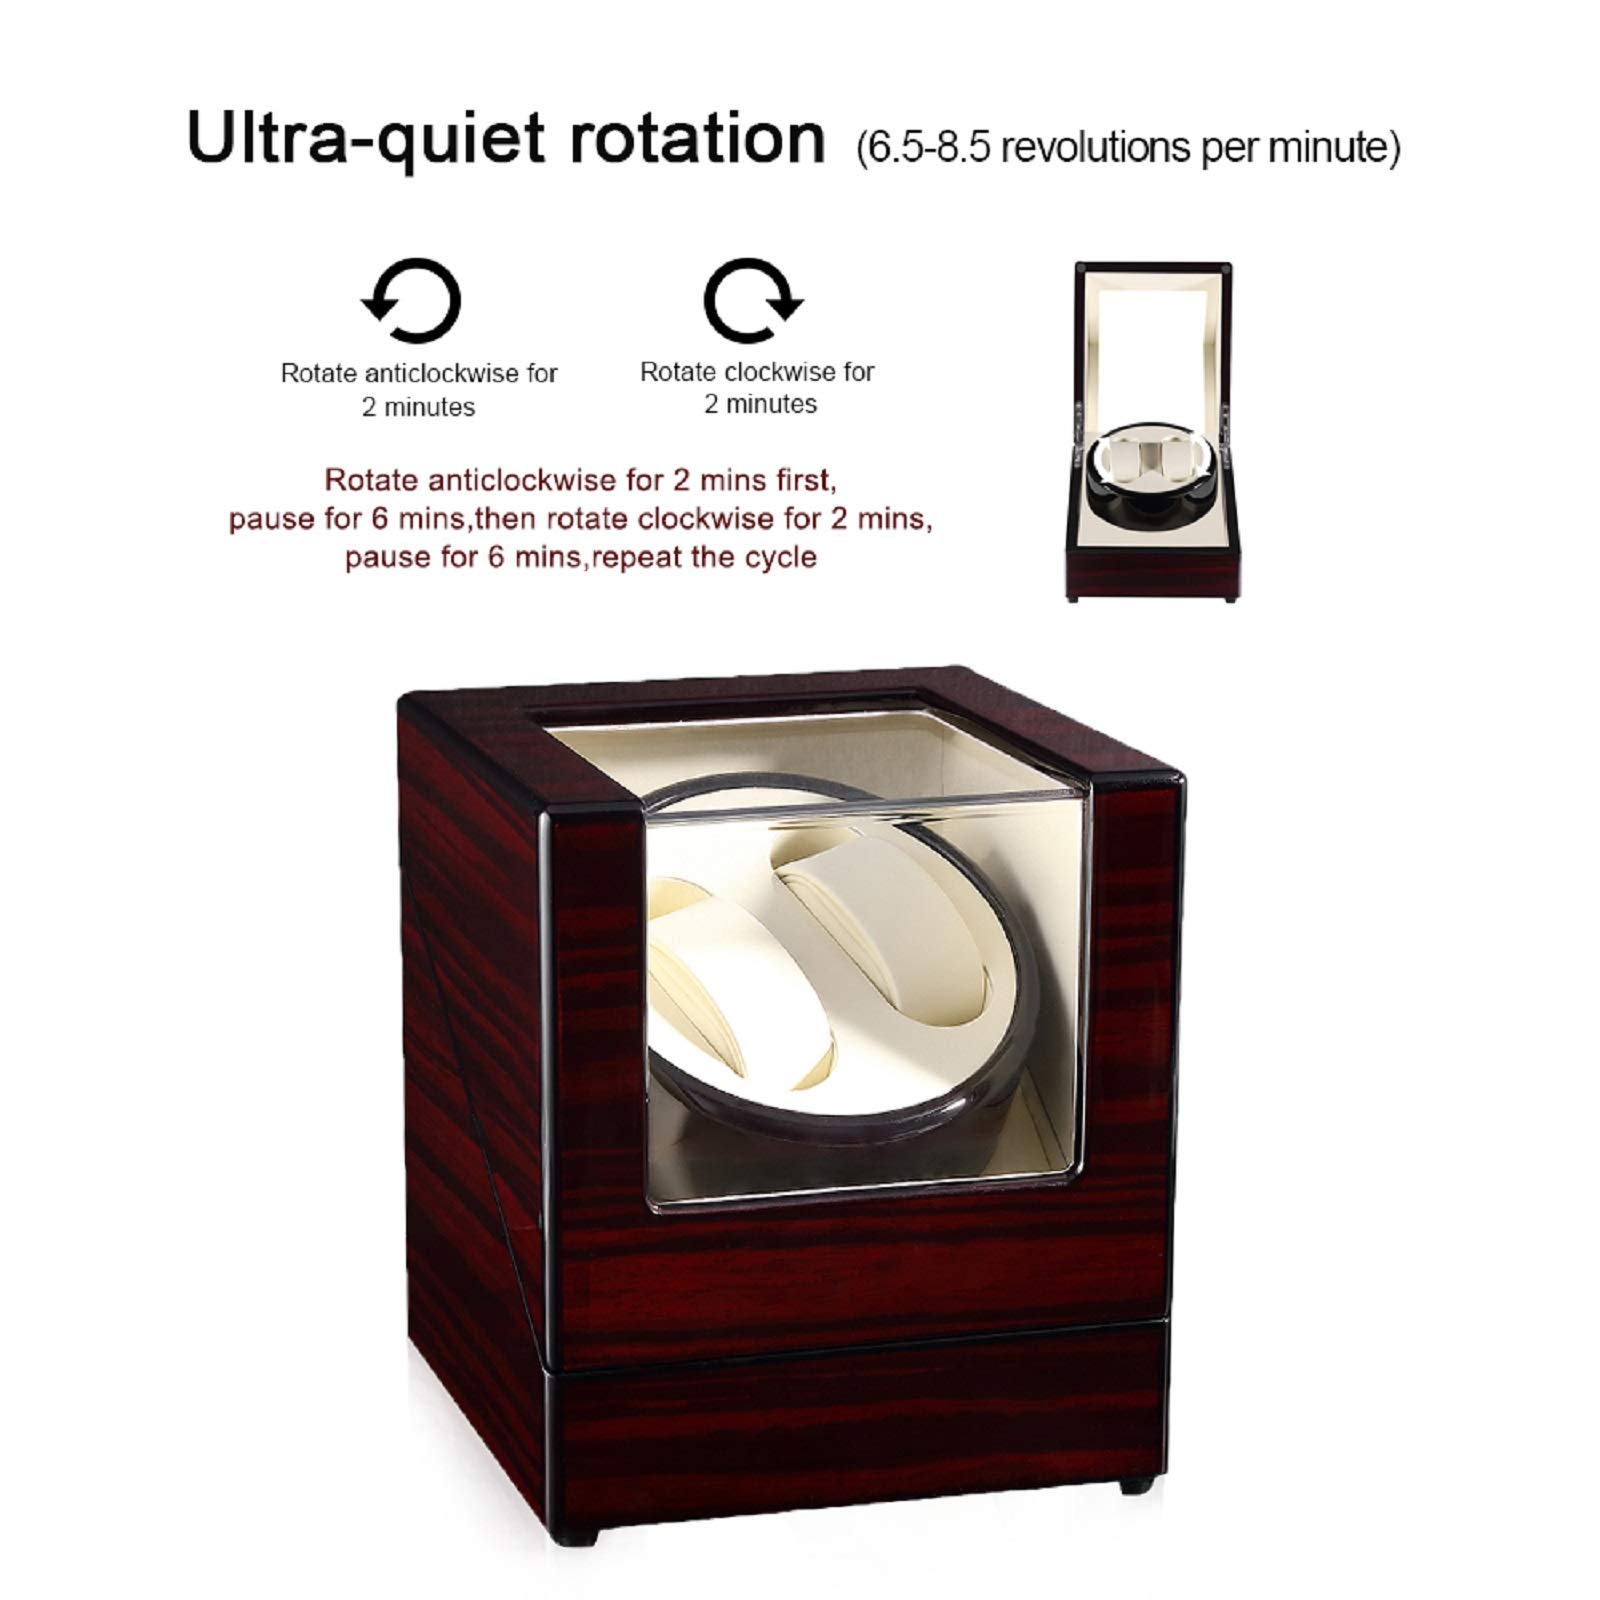 Uten Automatic Watch Winder Box Luxury Wooden Watch Storage Case, Double Watch Winder with Quiet Motor 4 Rotation Mode for Father's Day Gift for Him, Birthday Gift. Red